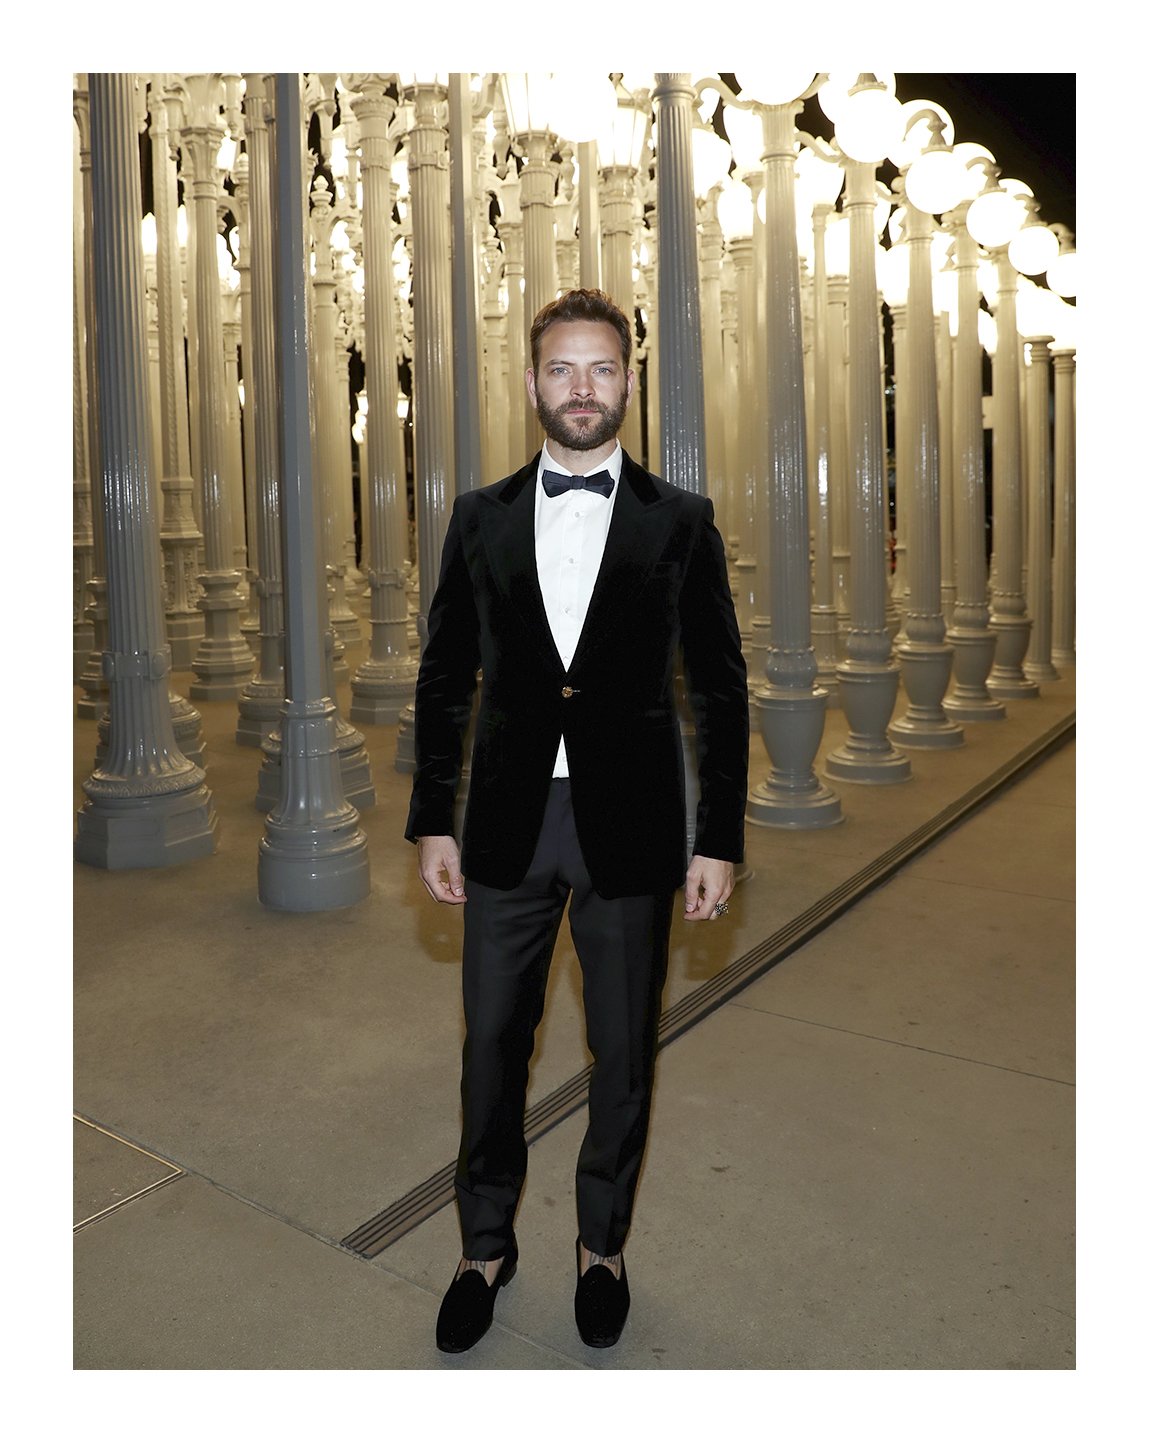 gucci on X: "To the Eighth annual Art+Film Gala, actor @AleBorghi_ a one button peak lapel formal jacket with a piqué evening shirt, trousers with grosgrain detail, satin bow